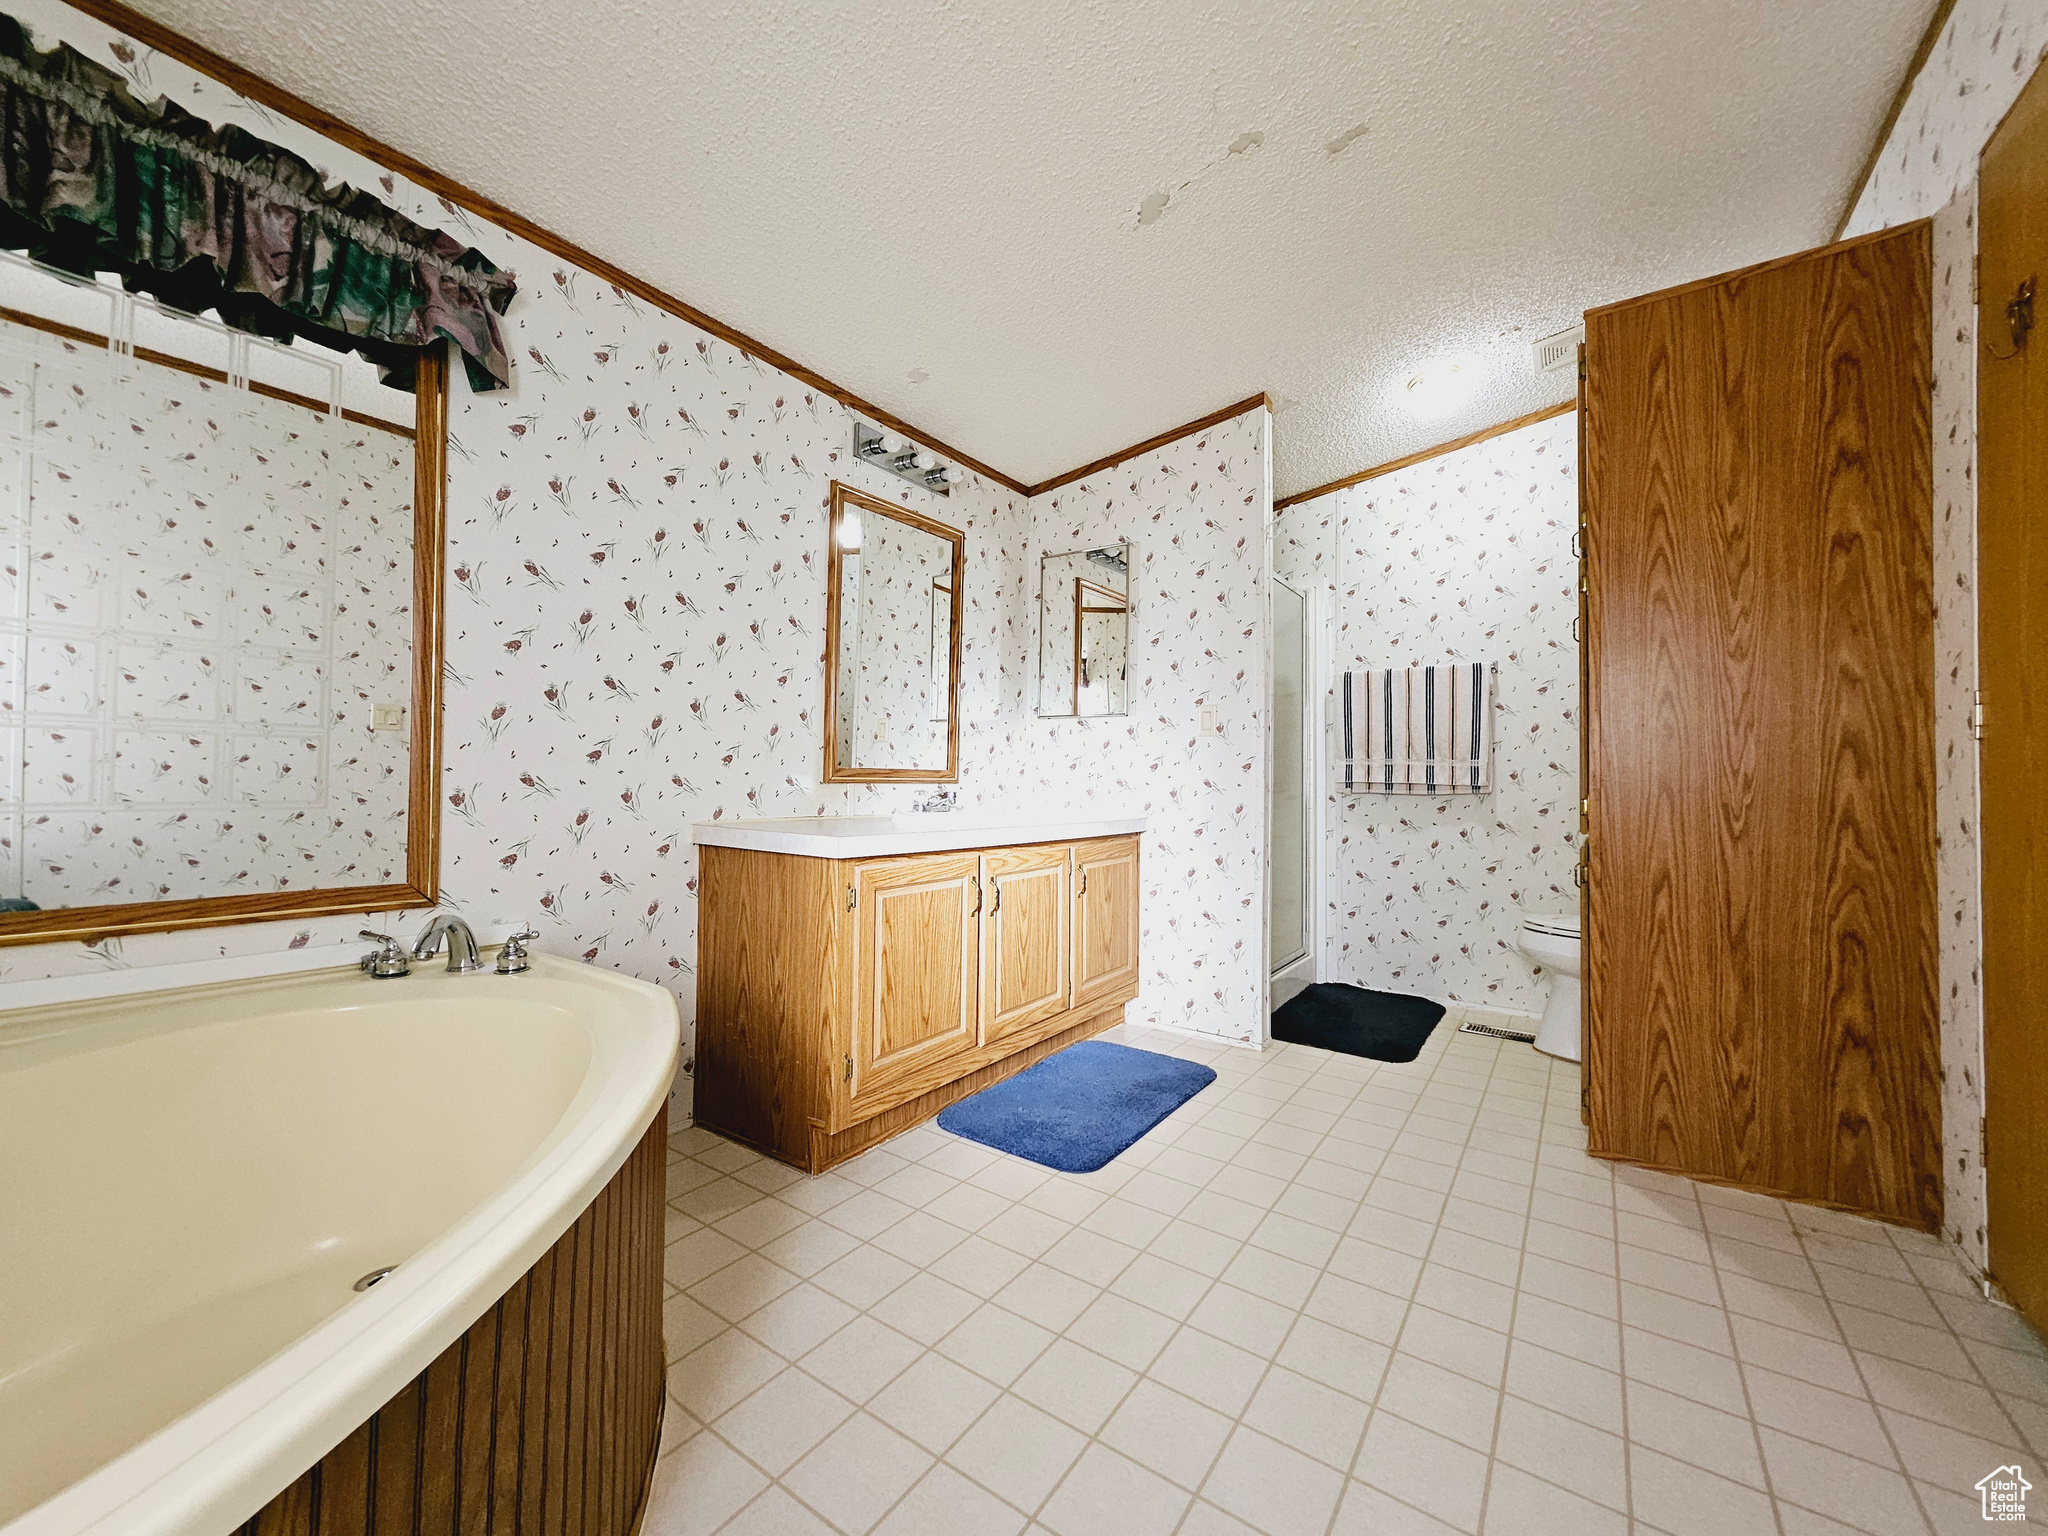 Full bathroom featuring vanity, toilet, a textured ceiling, and tile flooring